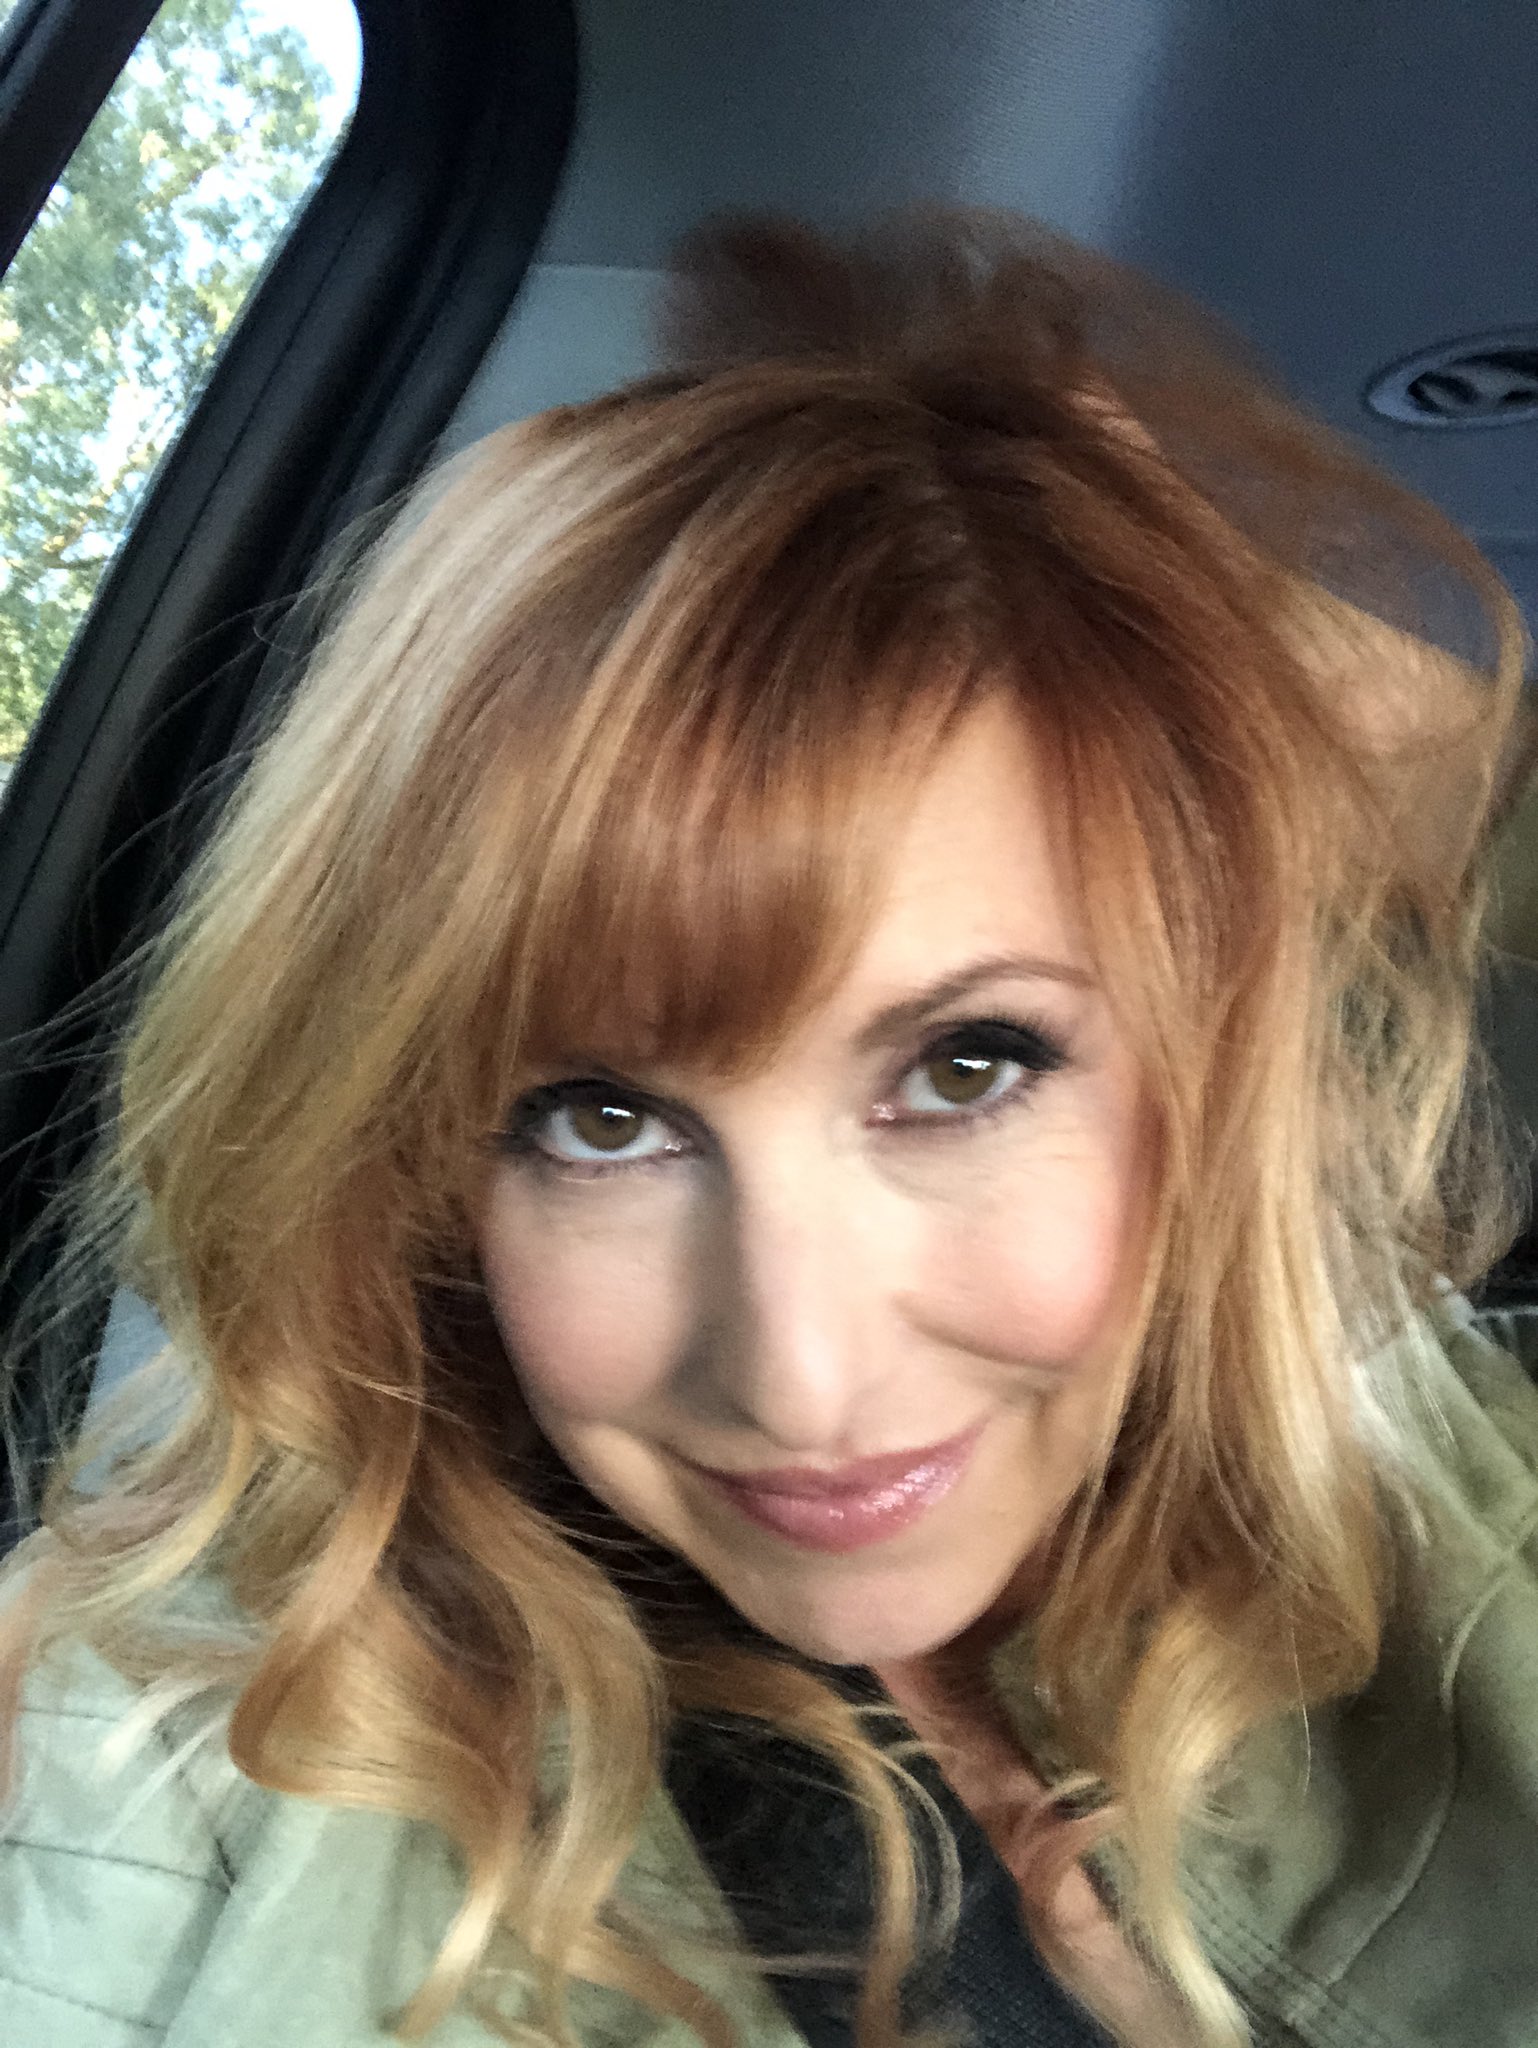 Kari Byron on Twitter "One day to recover from jet lag